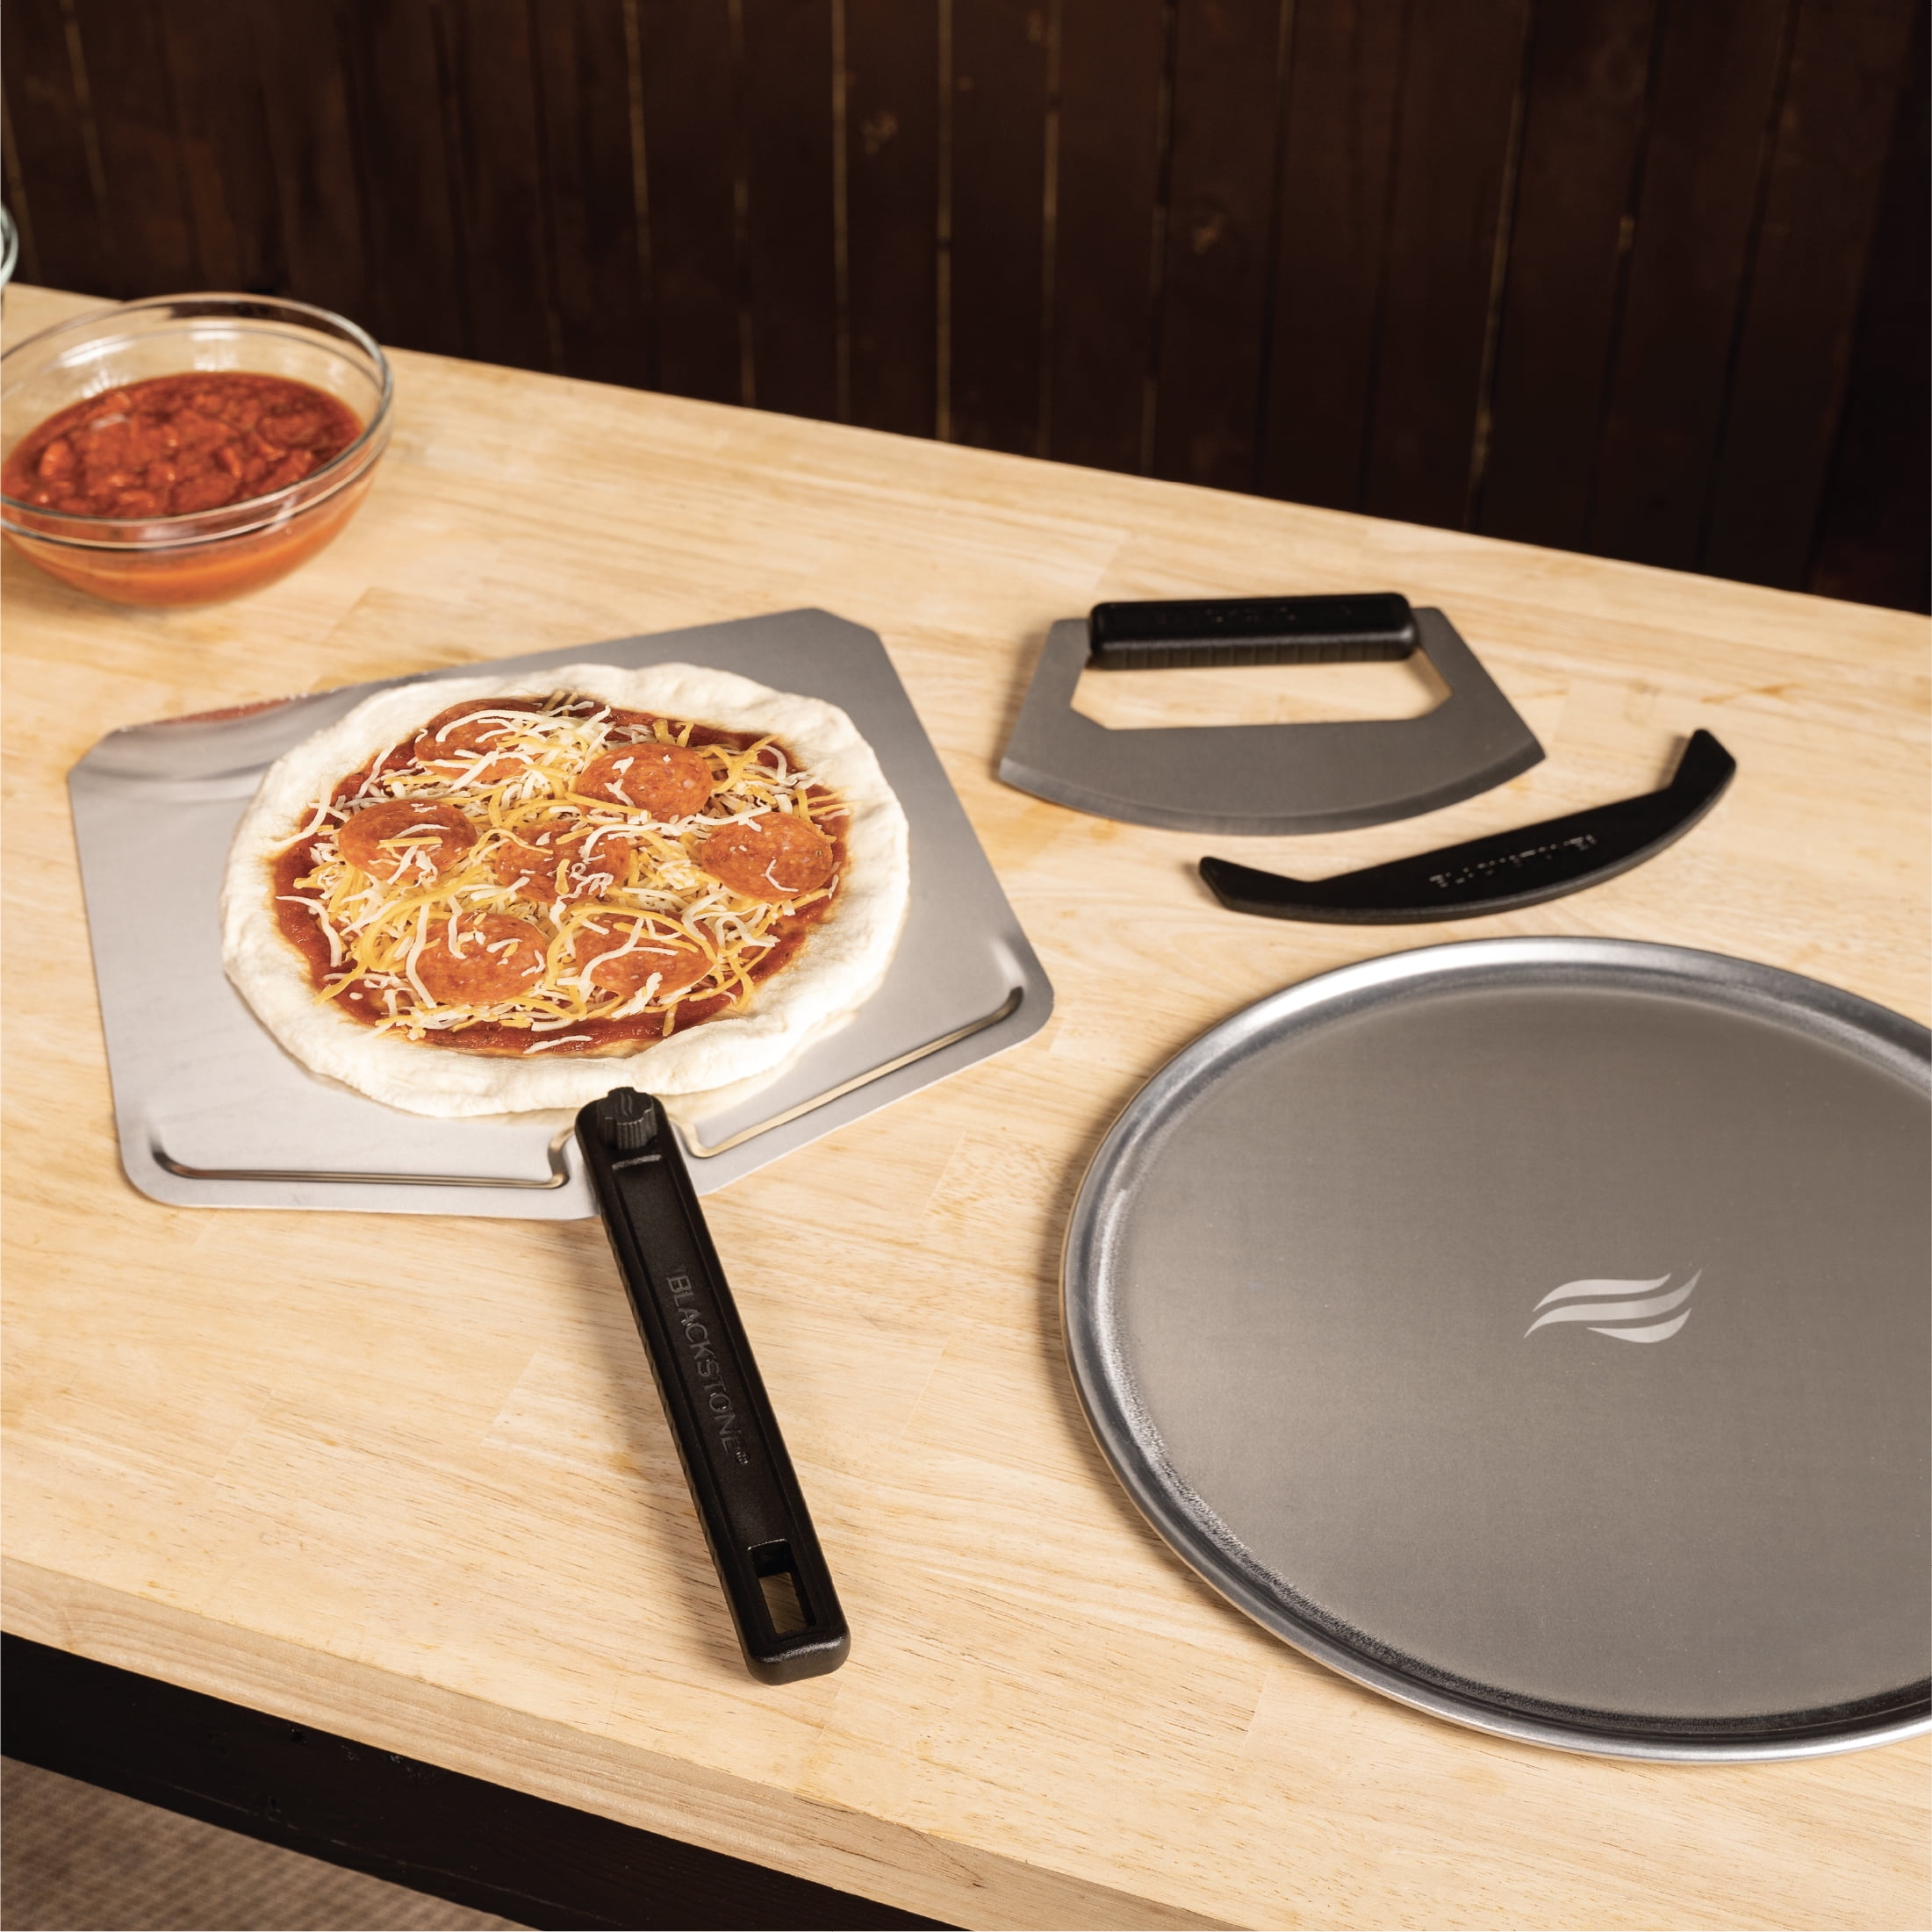 Blackstone Pizza Kit with Aluminum Pizza Tray, Peel, and Cutter, 3-Piece